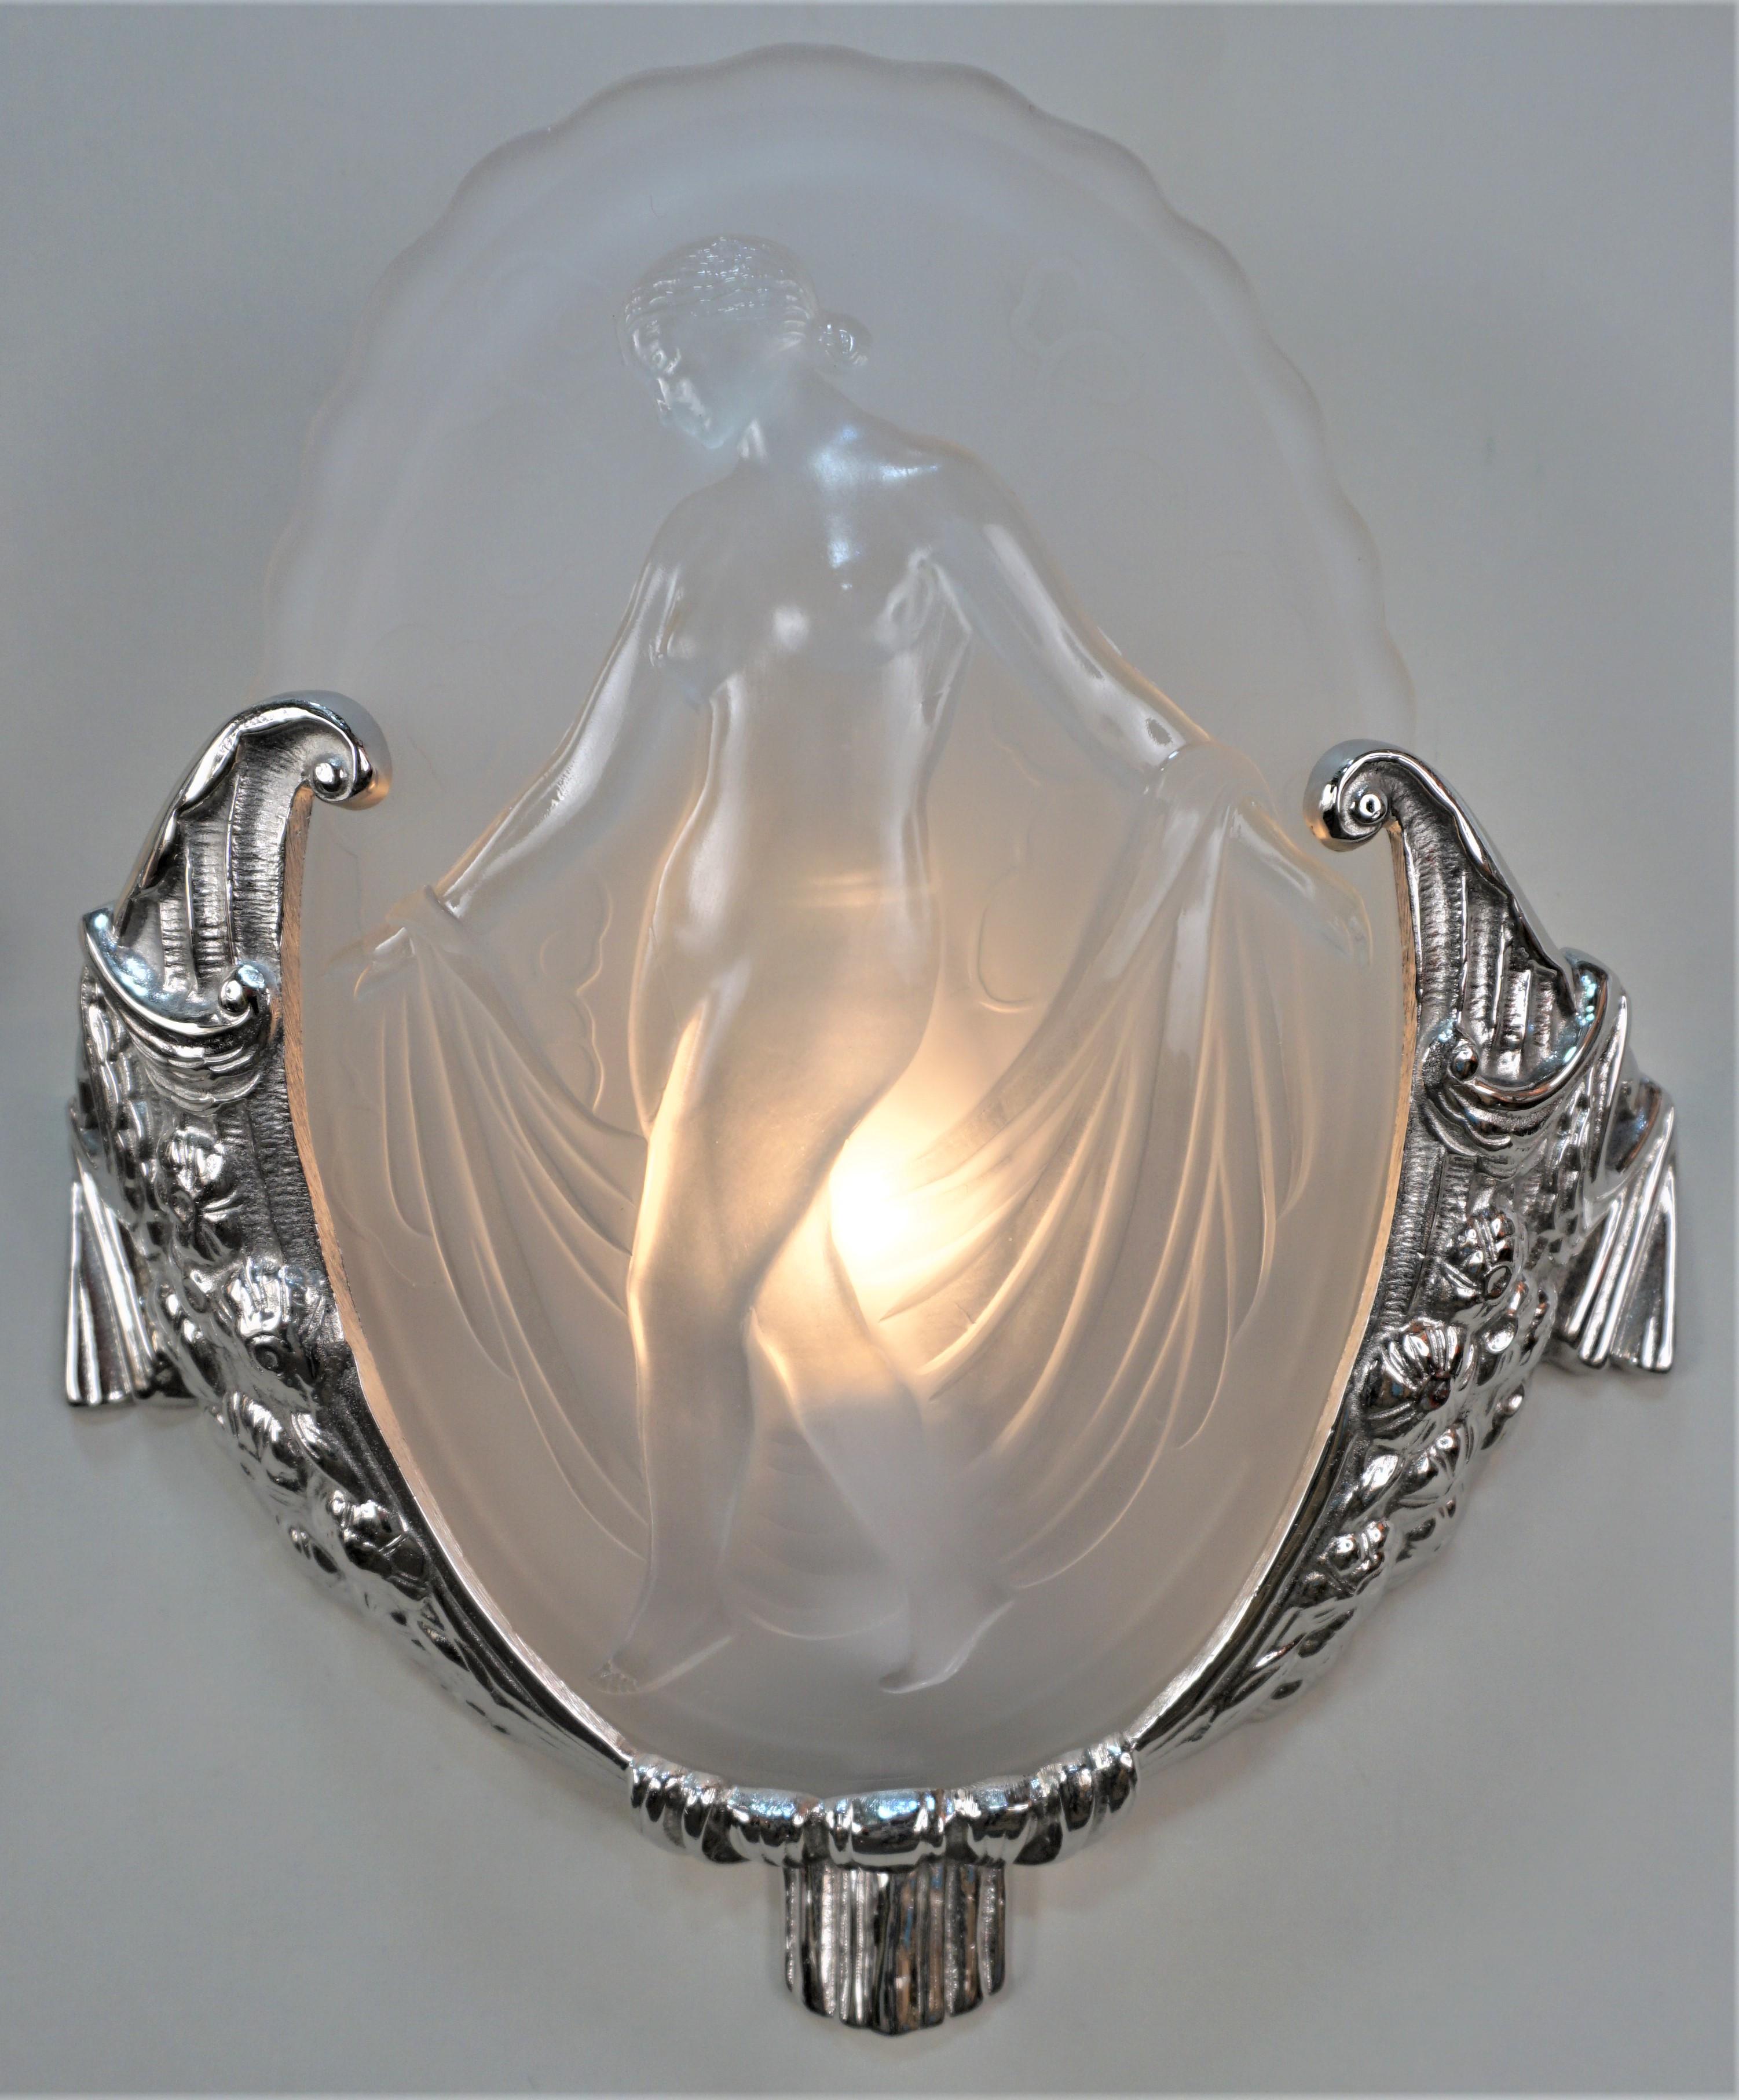 Exquisite pair of Art Deco wall sconces by Muller Freres. Clear frost ovel shape with high light nude figure, each panel has different figure with beautiful high polished nickel on bronze frames.
Professionally rewired and ready for installation.